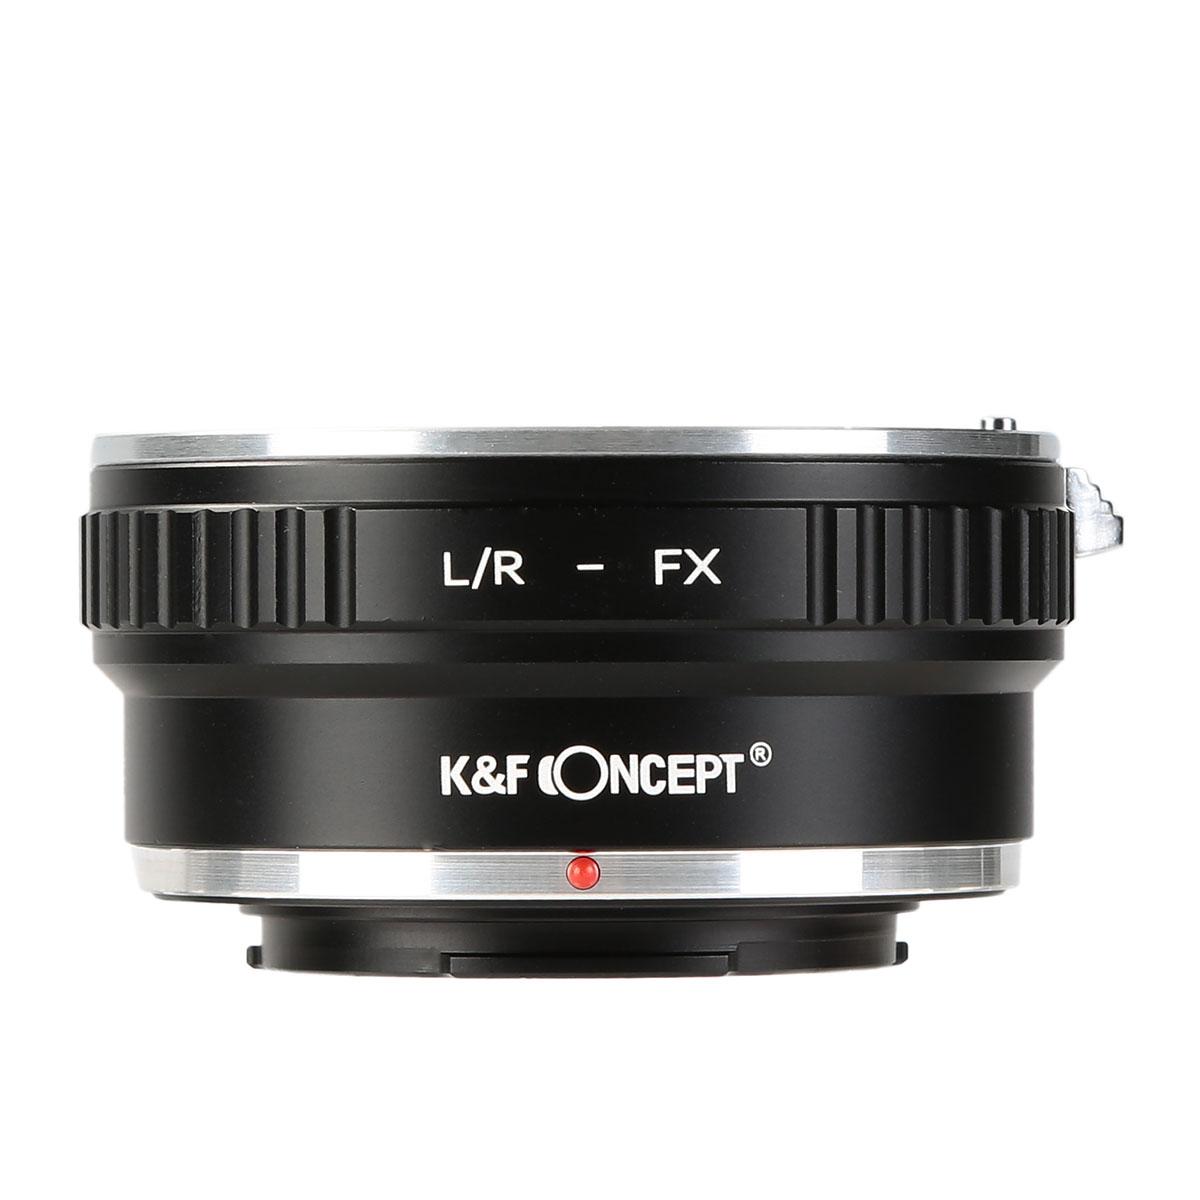 K&F Concept Lens Mount Adapter For Leica R Mount Lens to Fujifilm FX Mount Camera Adapter for Fujifilm FX Mount Camera L/R-FX 